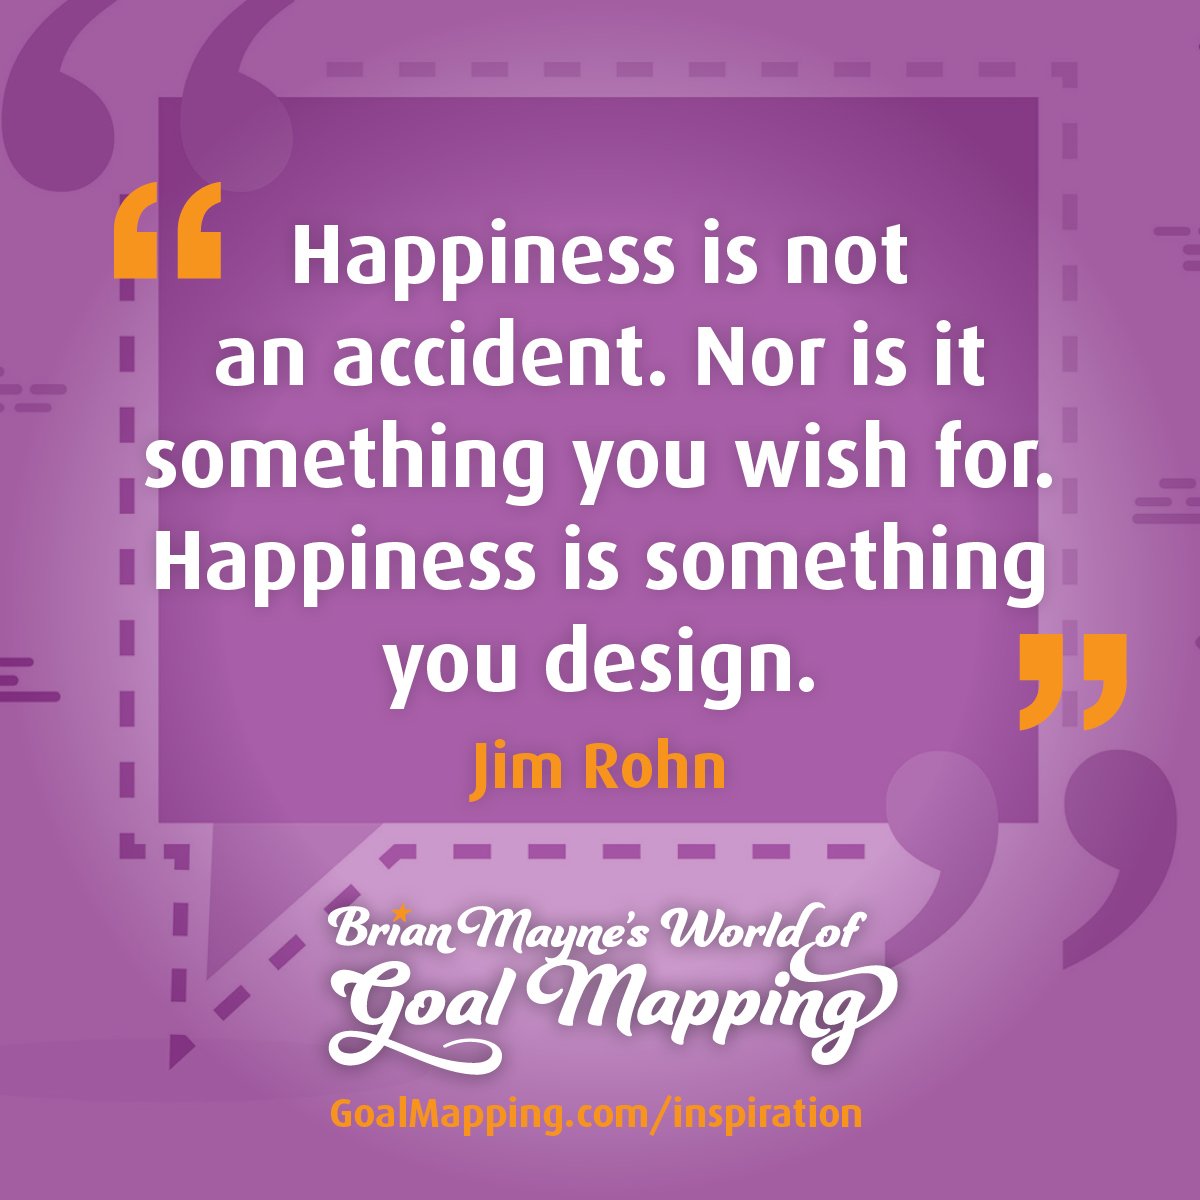 "Happiness is not an accident. Nor is it something you wish for. Happiness is something you design." Jim Rohn